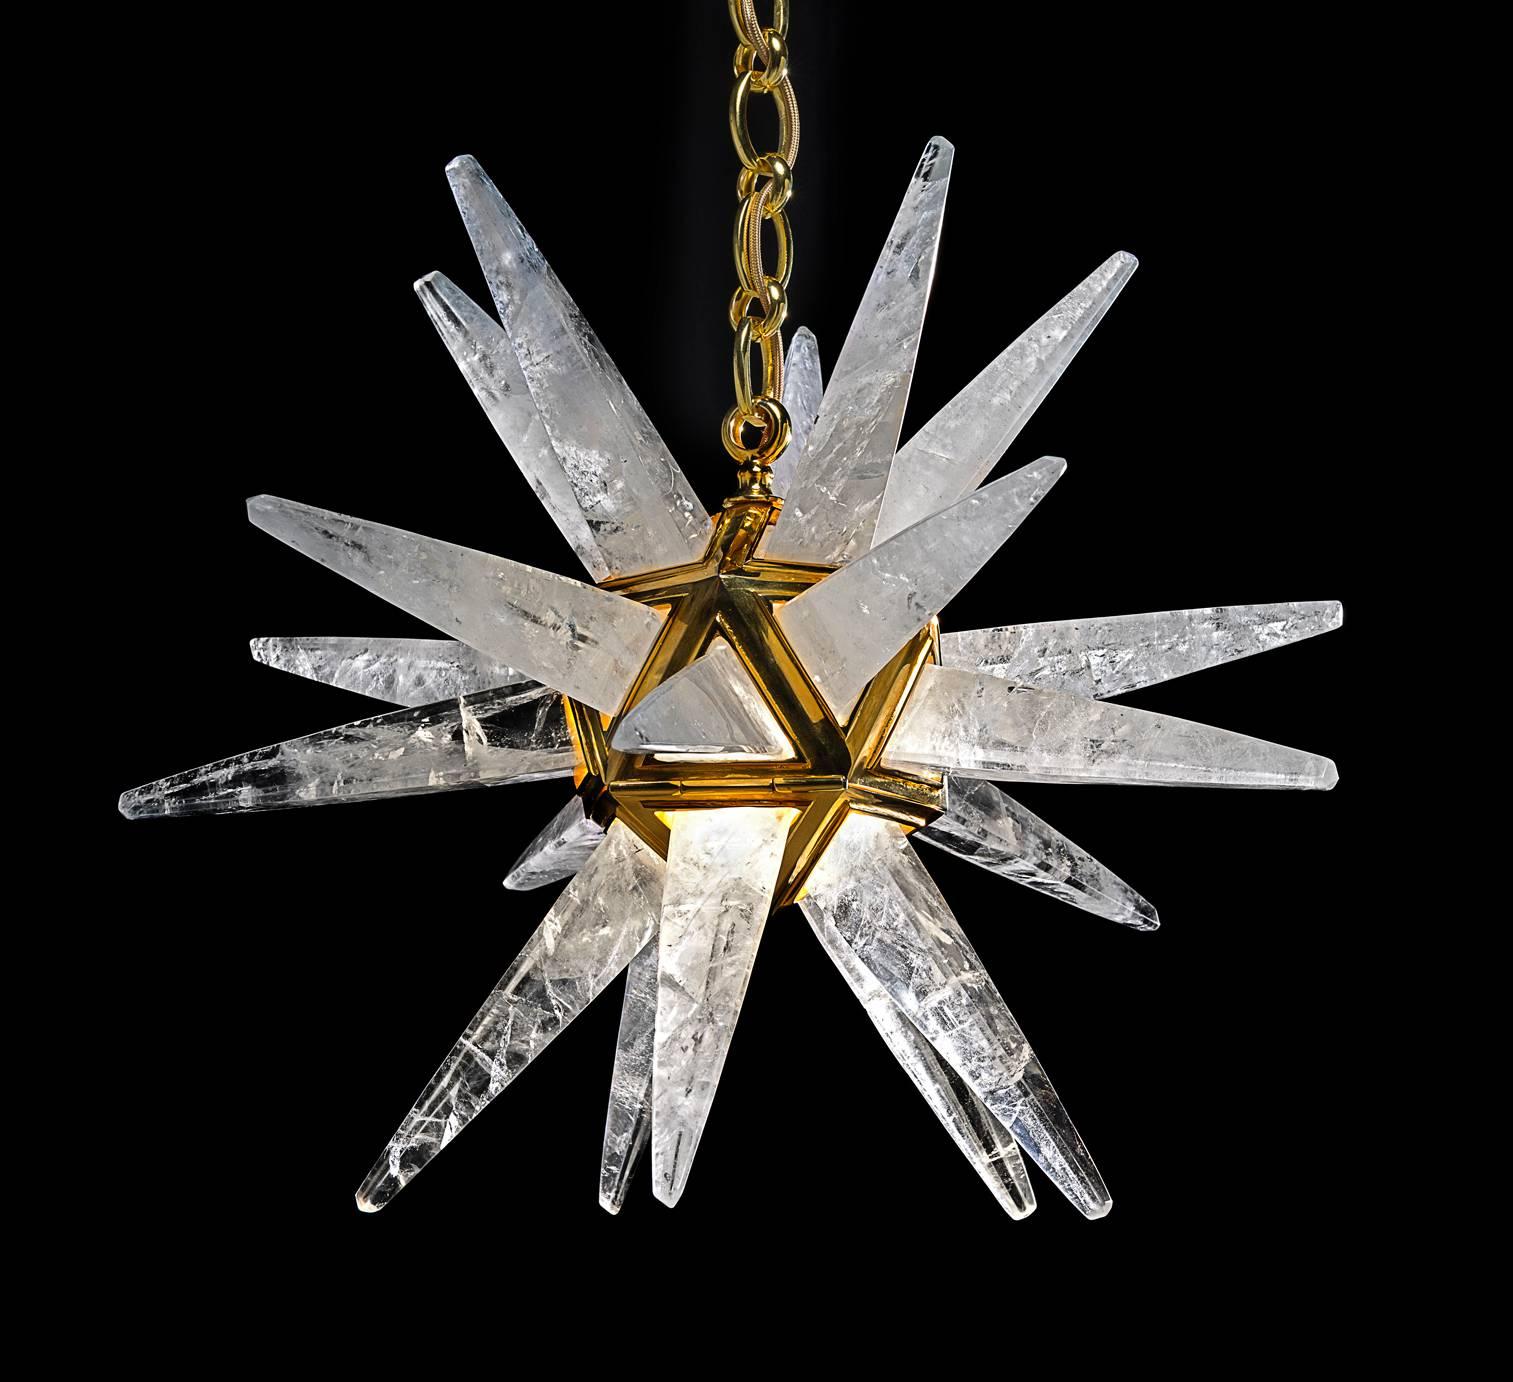 Rock crystal  quartz star III light gold edition. The fixture, the chain and the canopy of this rock crystal lighting are handmade in bronze. Each workers who belongs from a corporation made their work in the pure tradition of the 18th century. All